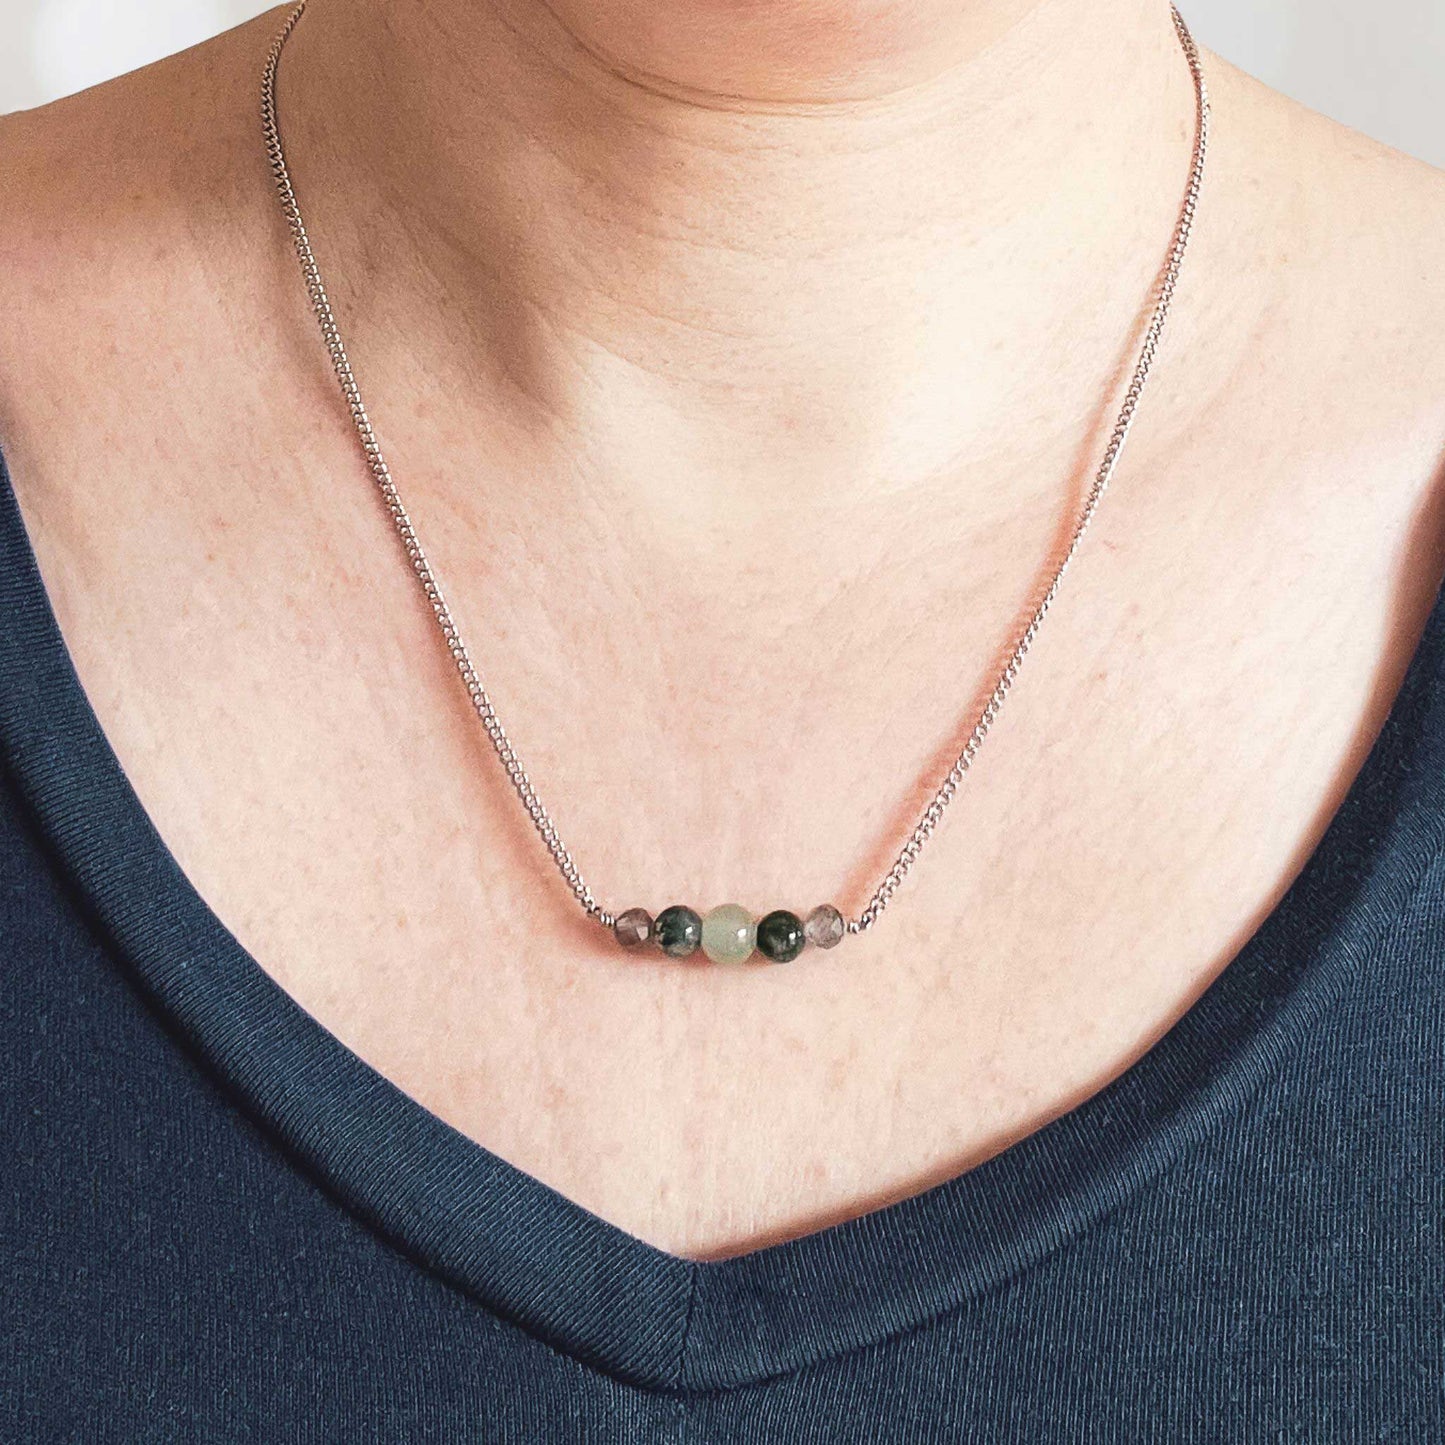 Woman wearing dark blue v neck top and dainty green gemstone necklace